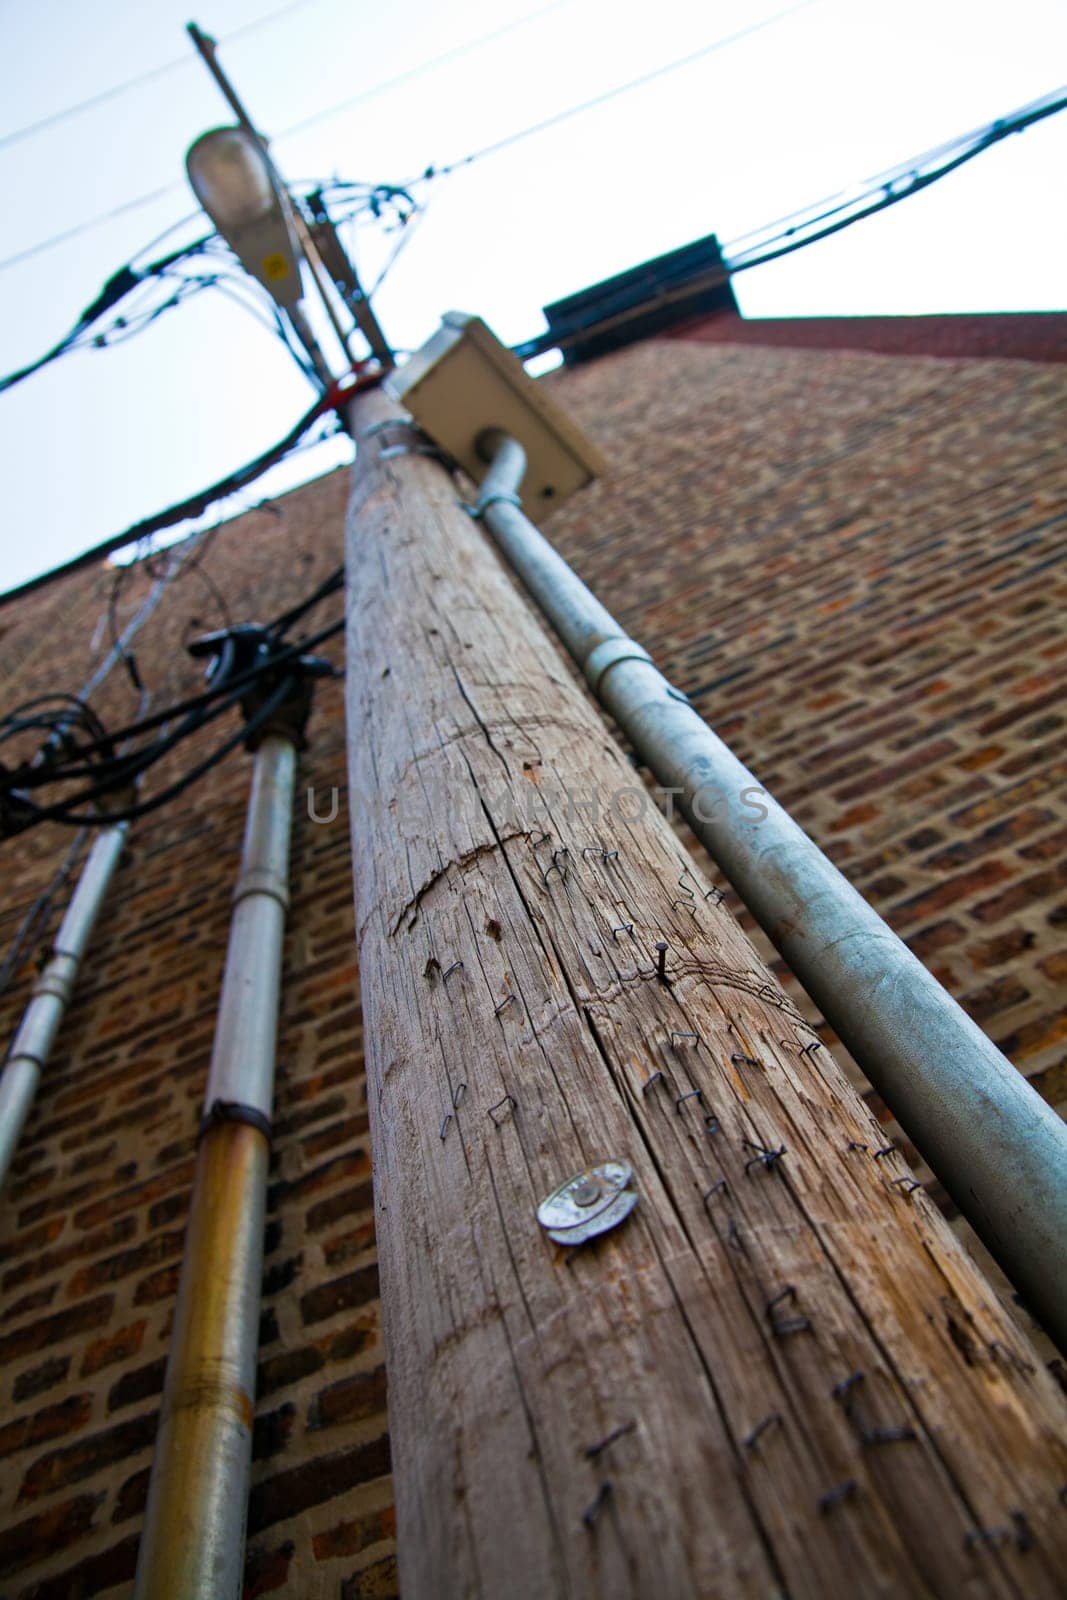 Urban Infrastructure: Aged wooden utility pole with weathered surface and attachments, showcasing the interconnectedness of urban utility systems. Captured in Chicago, Illinois.